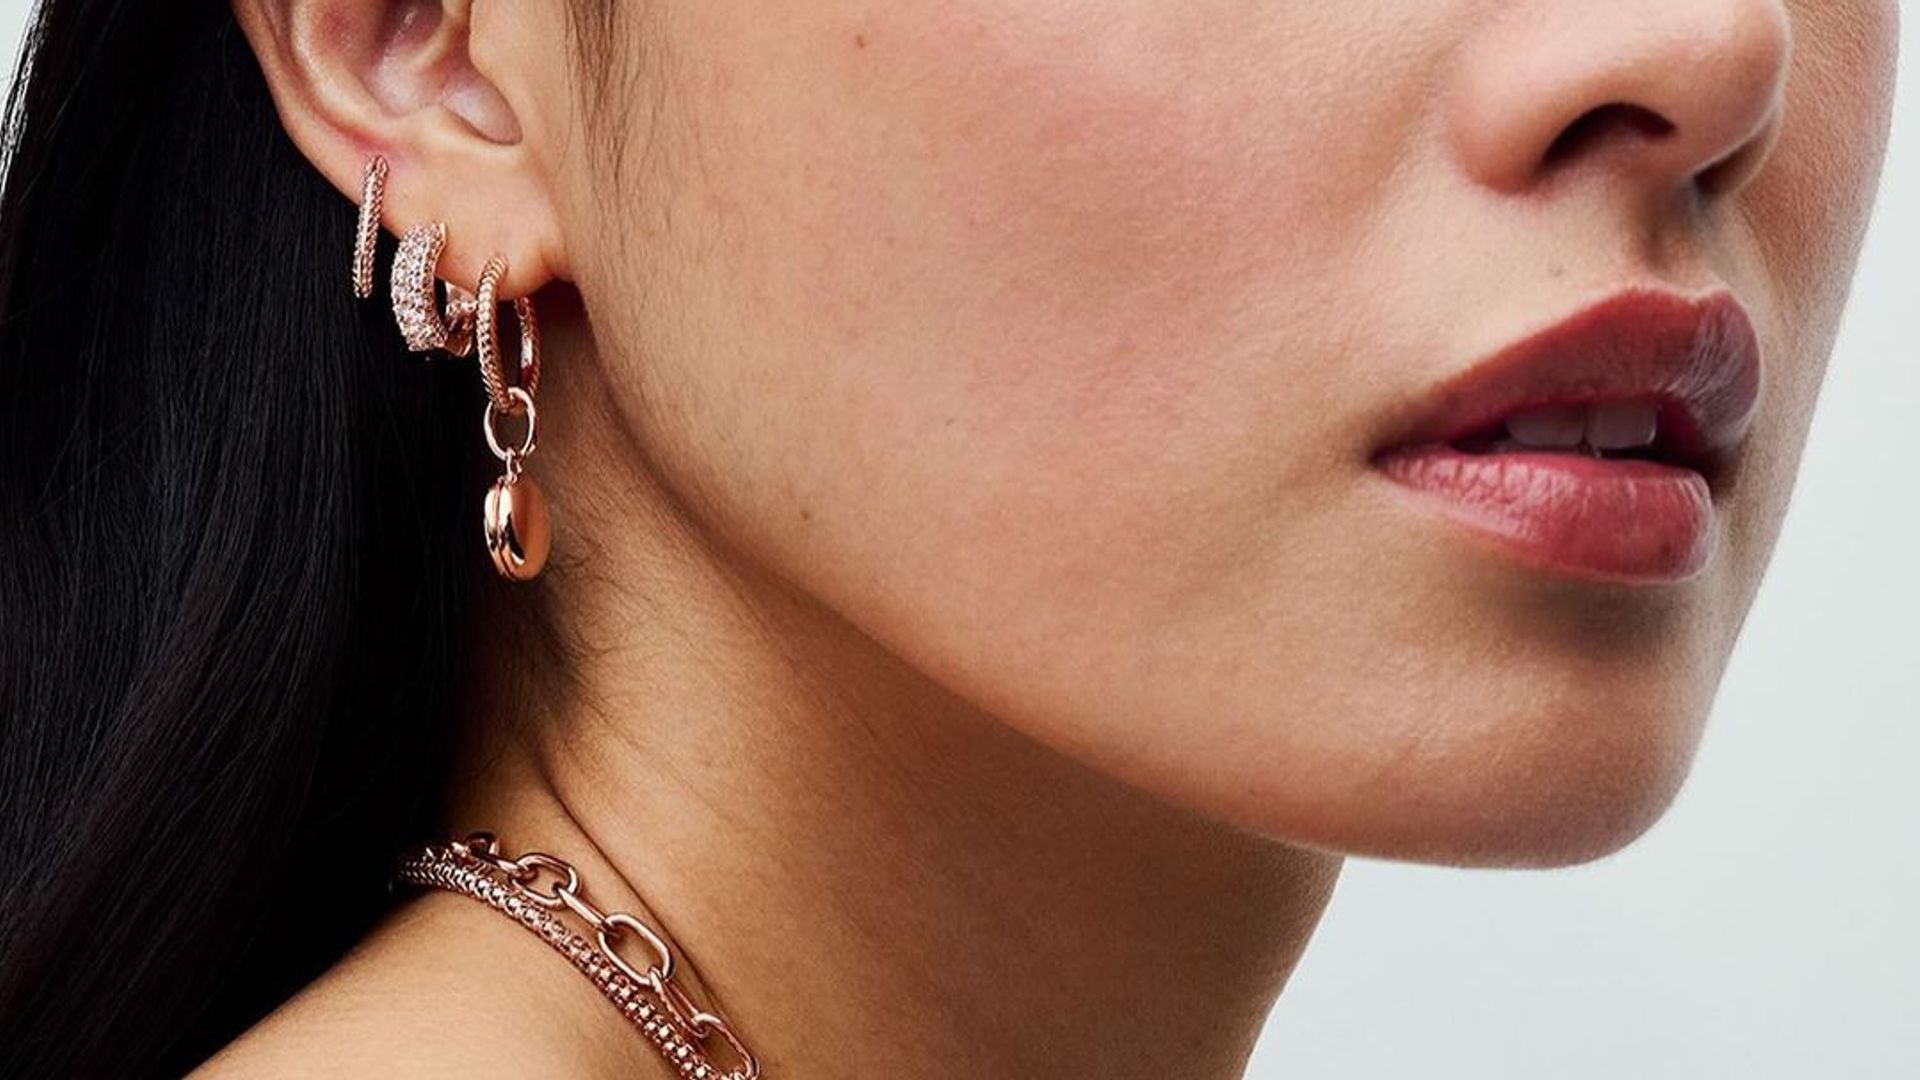 How to stack and style your earrings the right way, according to the experts